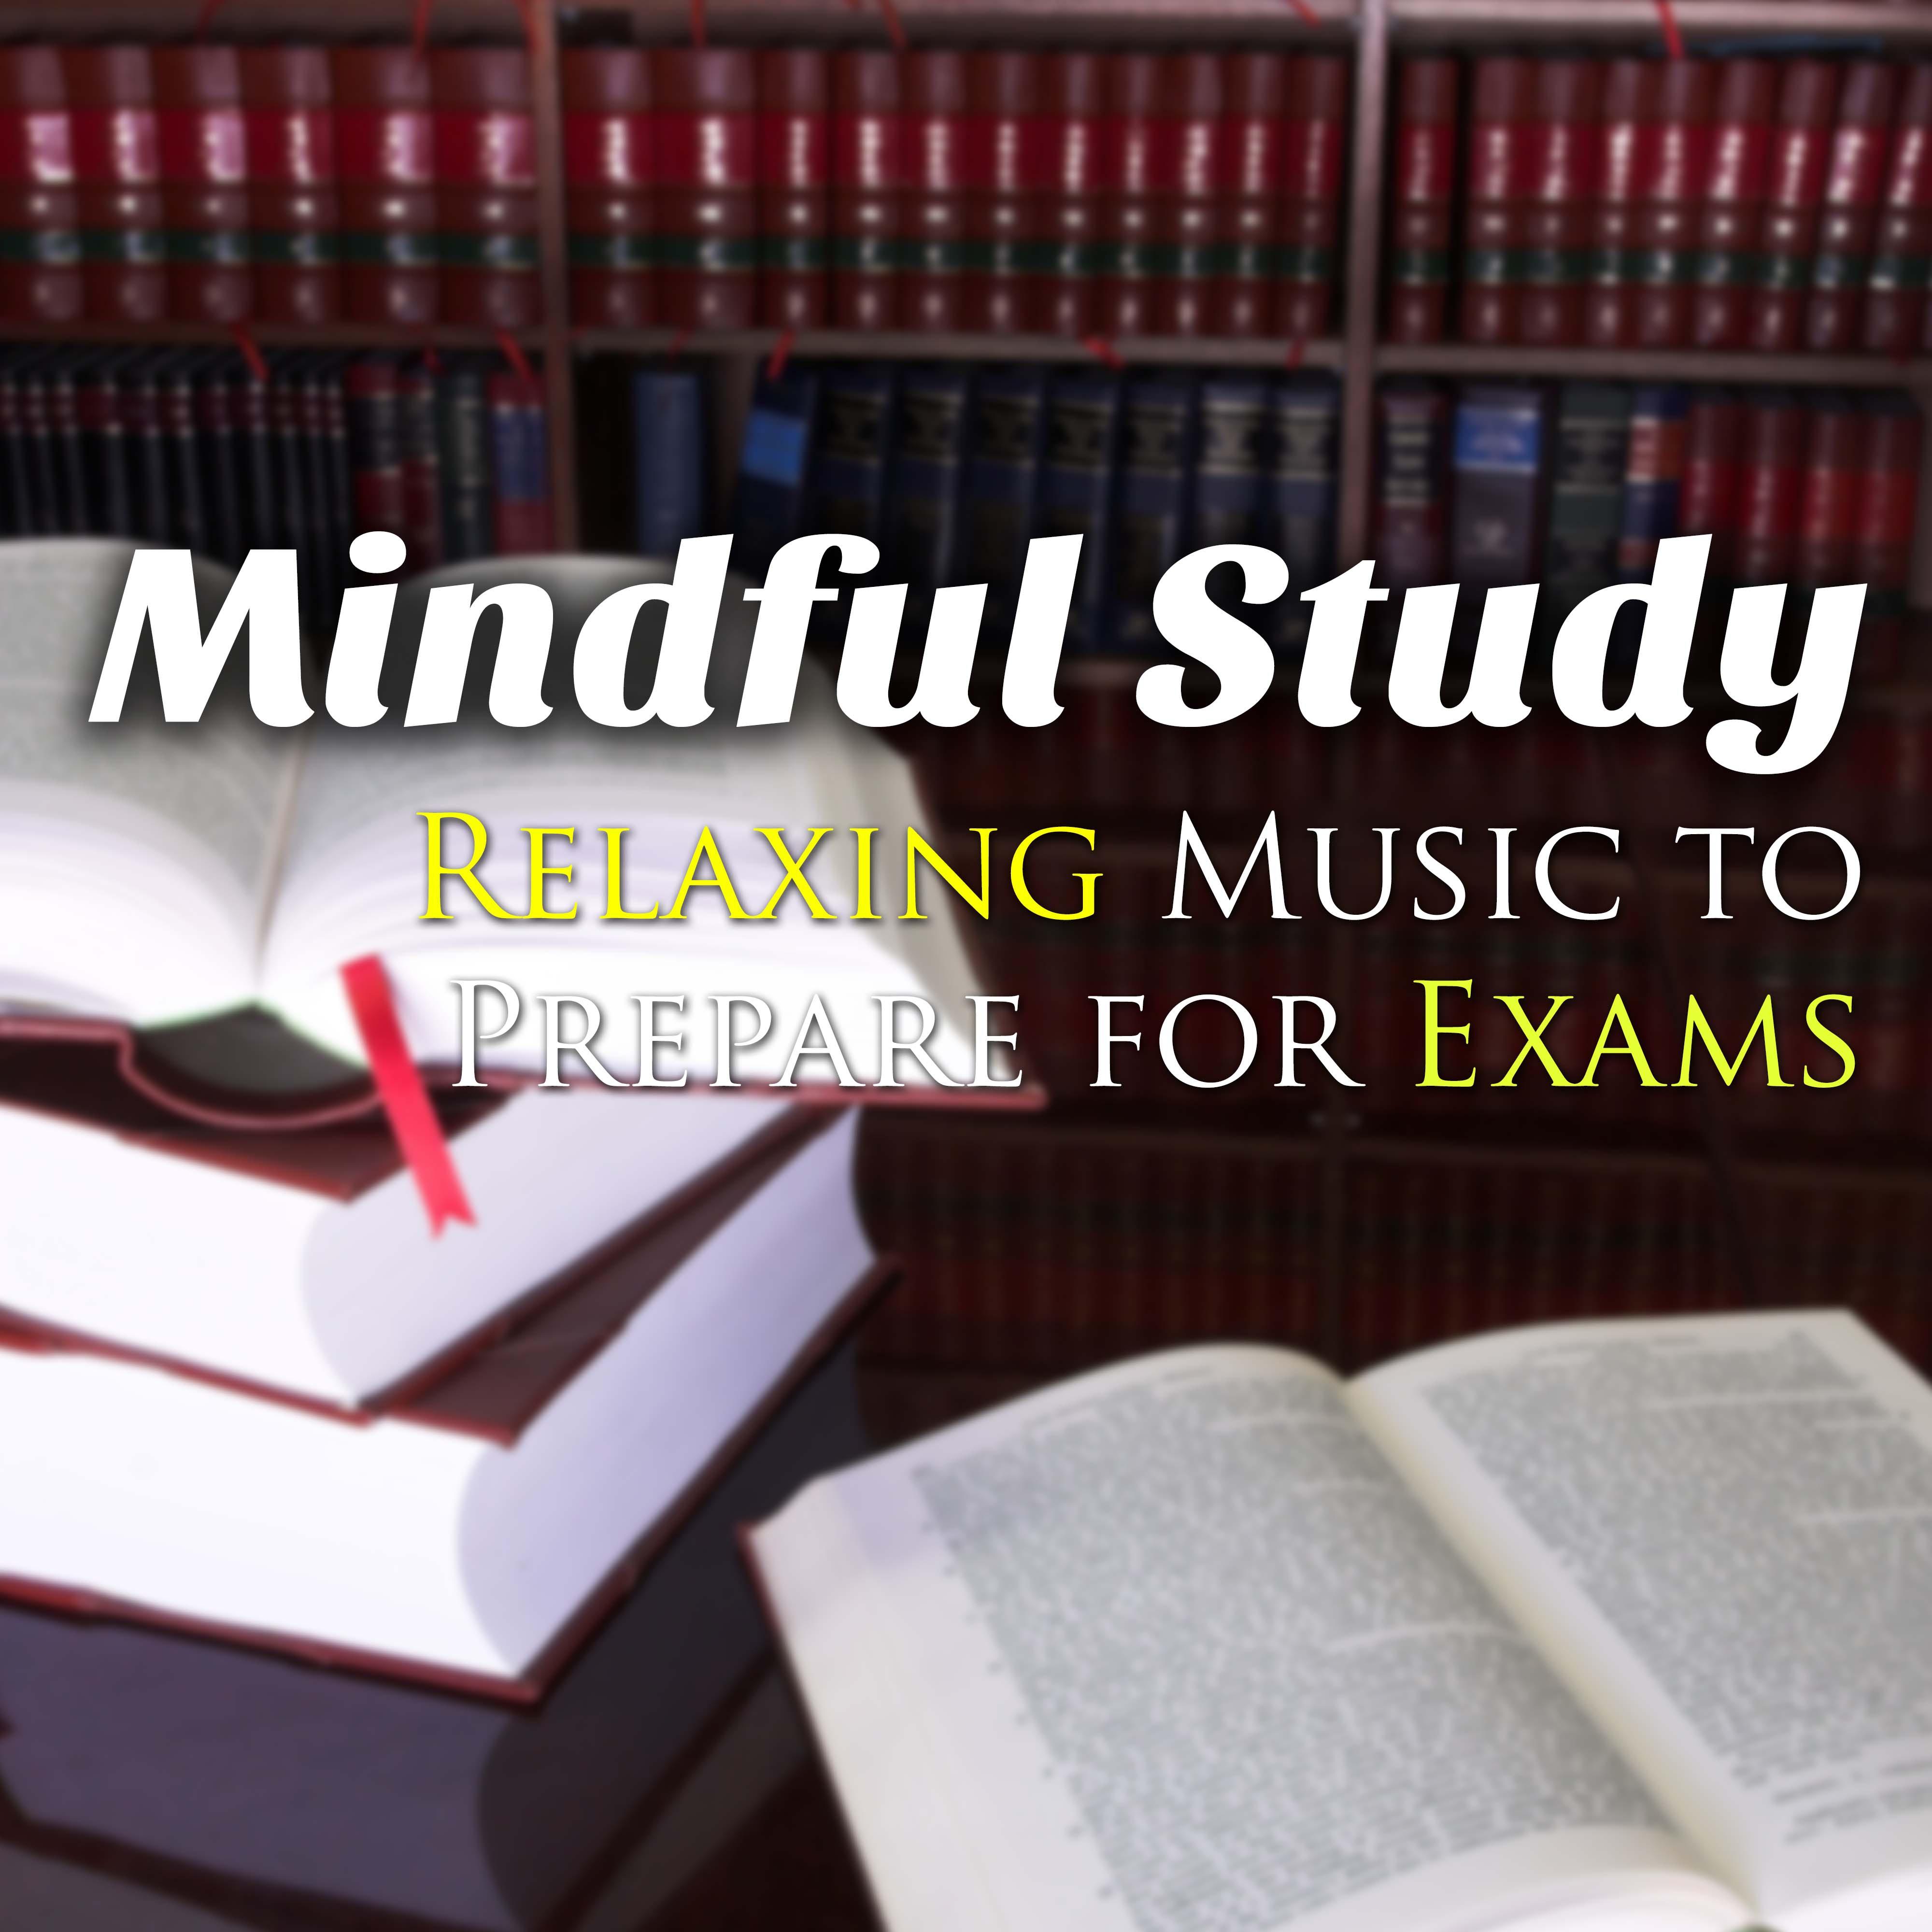 Mindful Study - Relaxing Music to Prepare for Exams